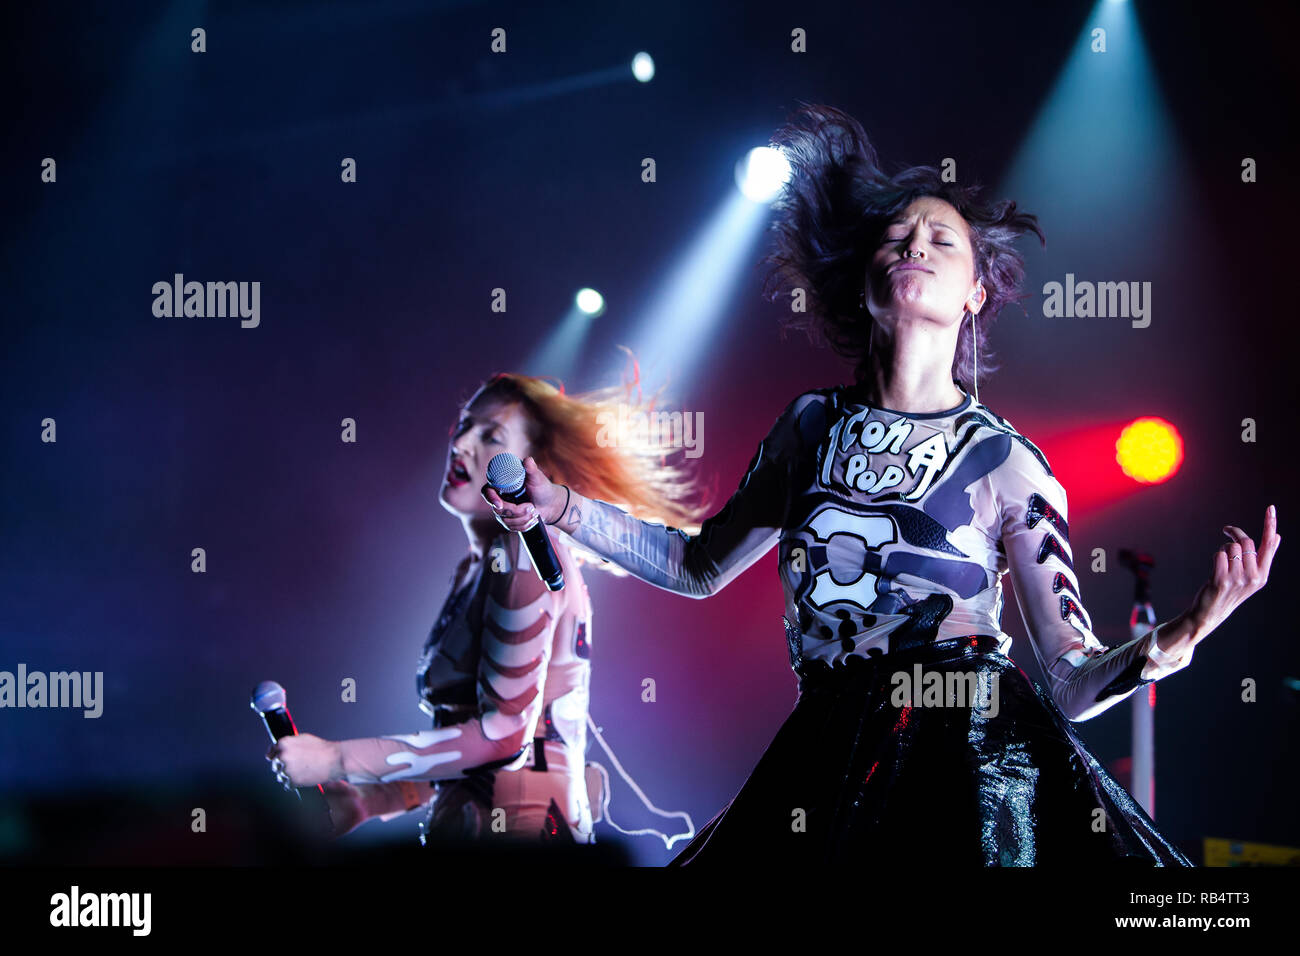 The Swedish electro house and synthpop duo Icona Pop performs a live concert at the Danish music festival Roskilde Festival The duo consist of the members Caroline Hjelt (L) and